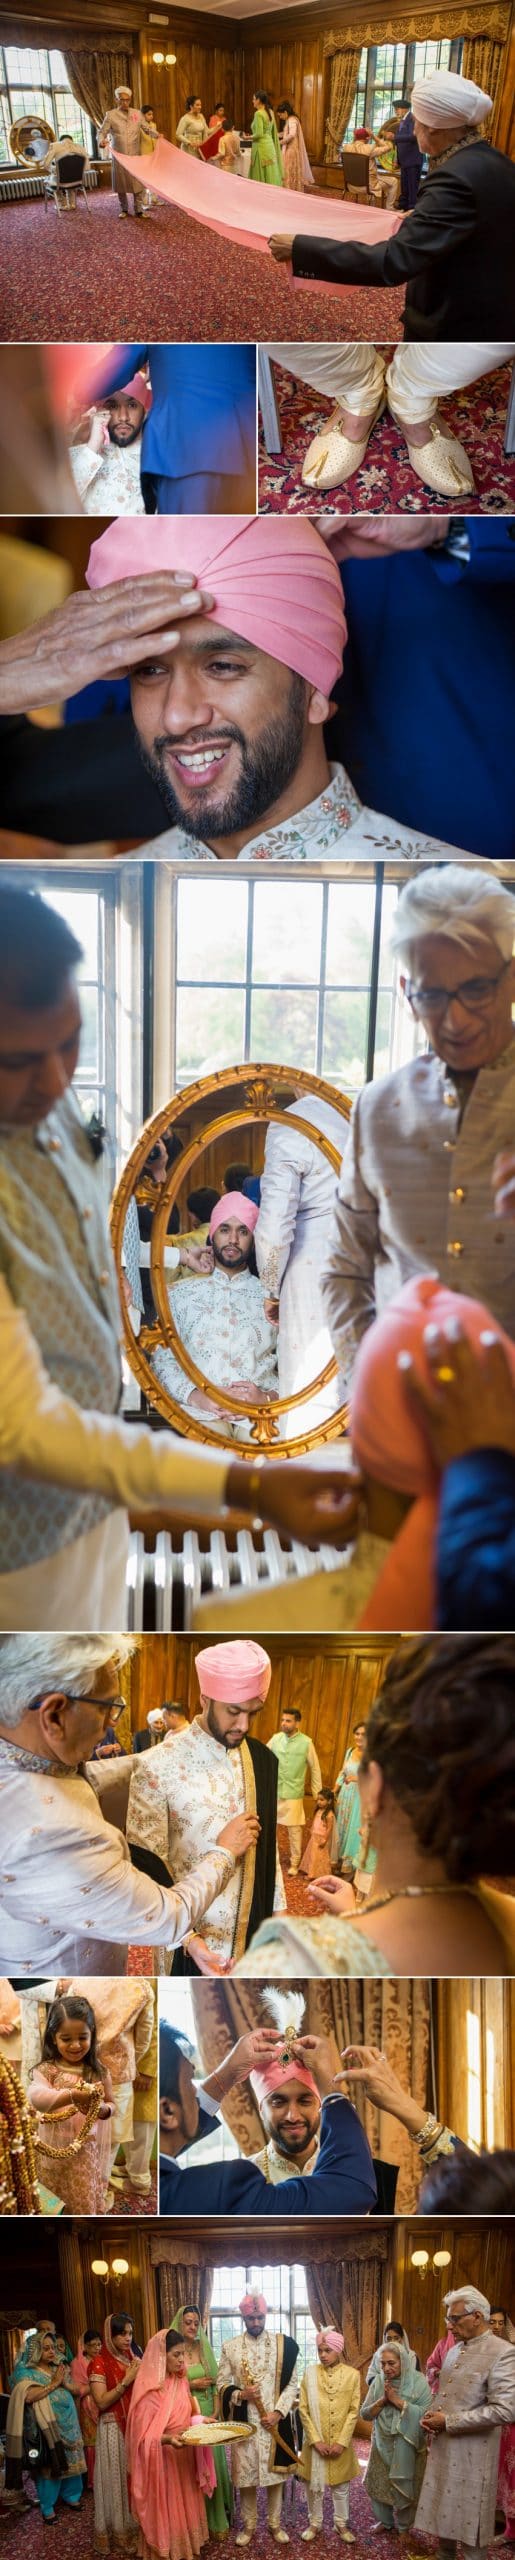 Sikh Wedding Photography at Dunchurch Park Hotel 3 scaled